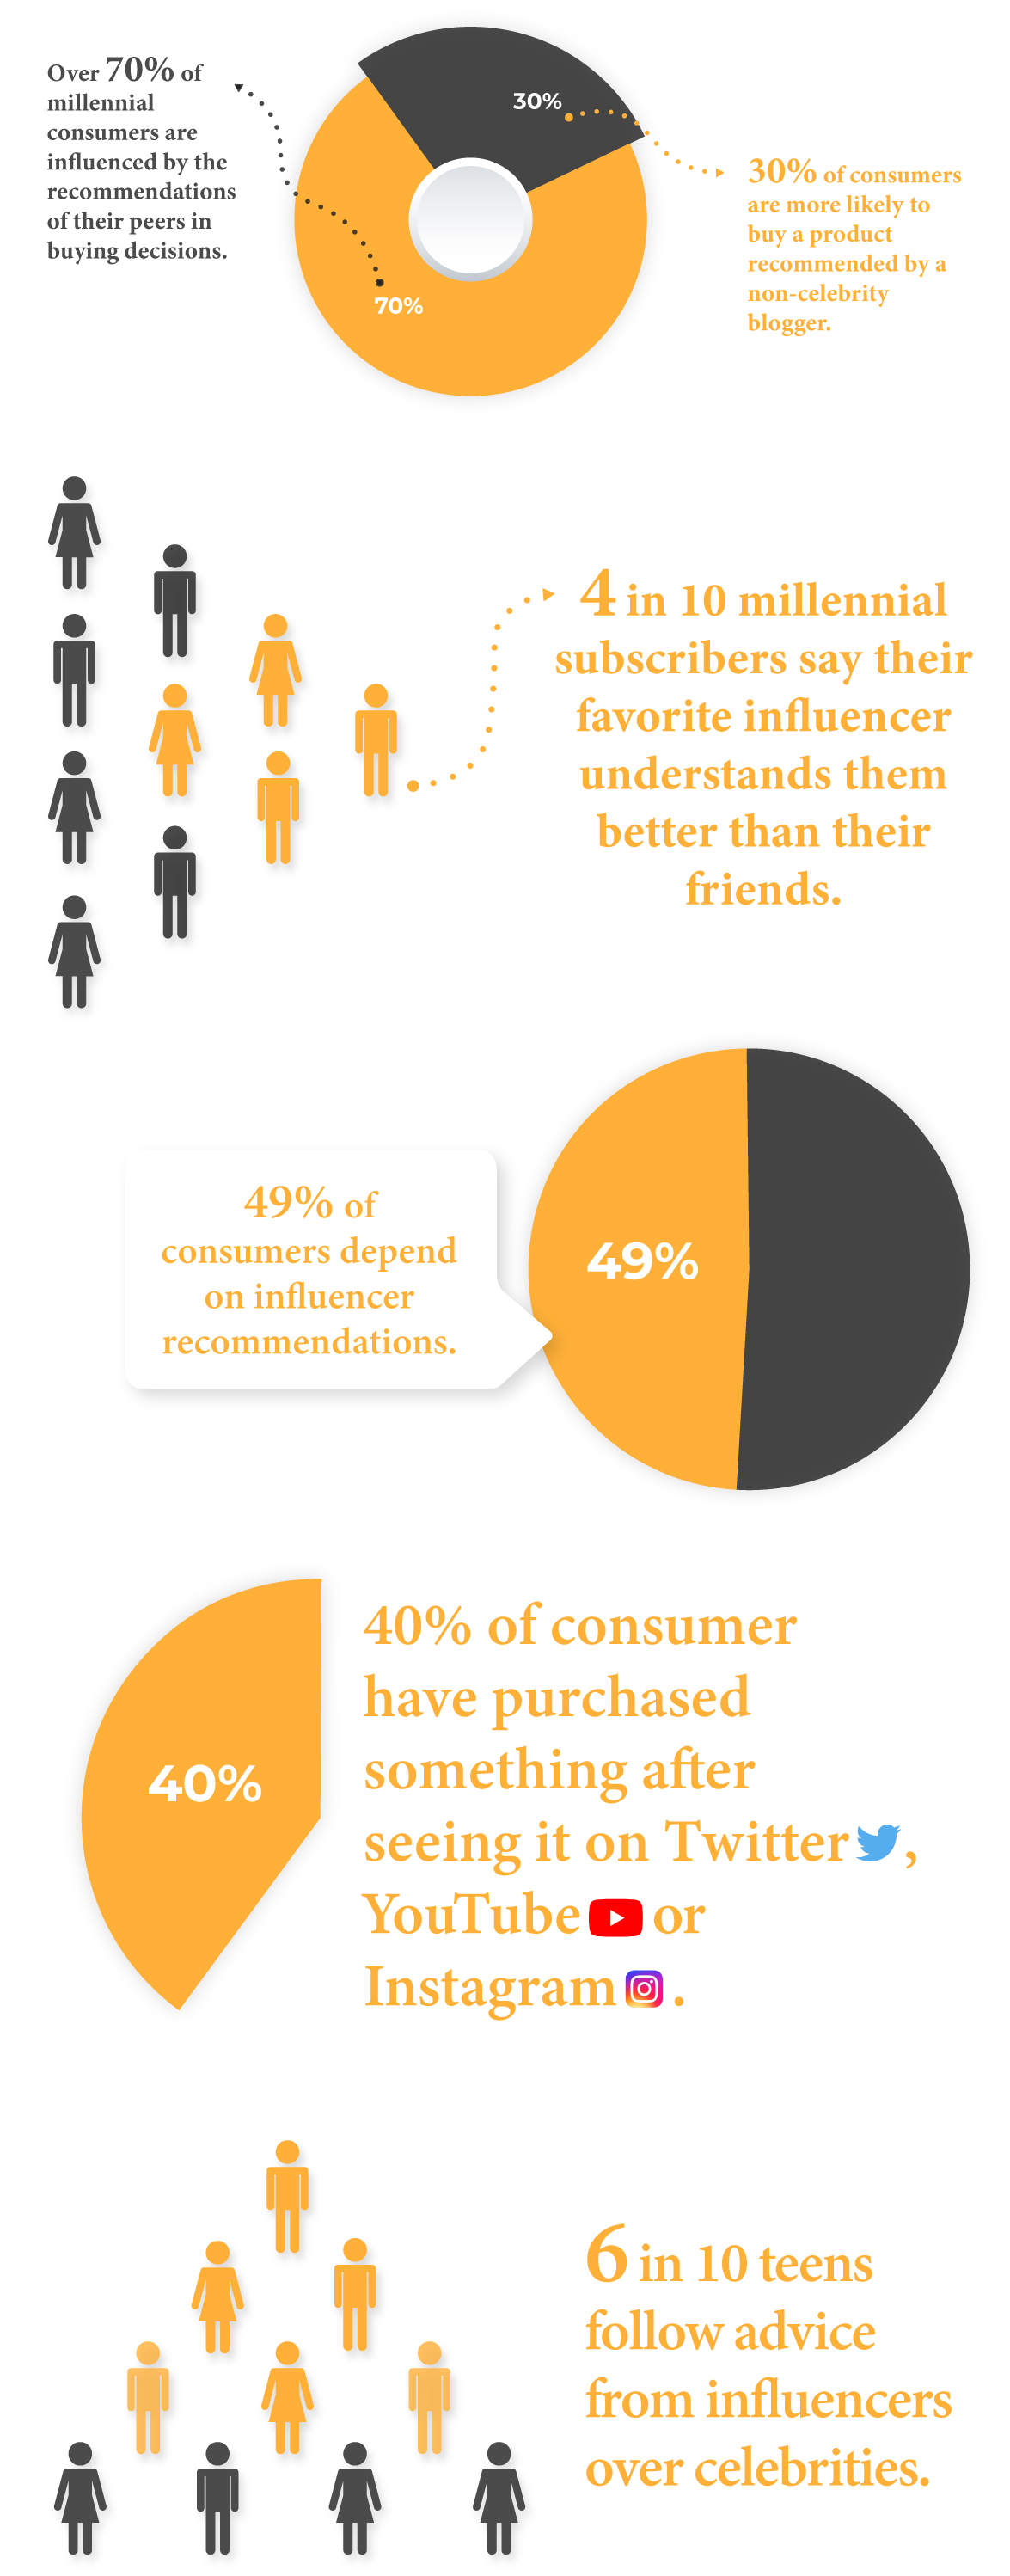 Infographic related to effect of Instagram influencers on consumers 